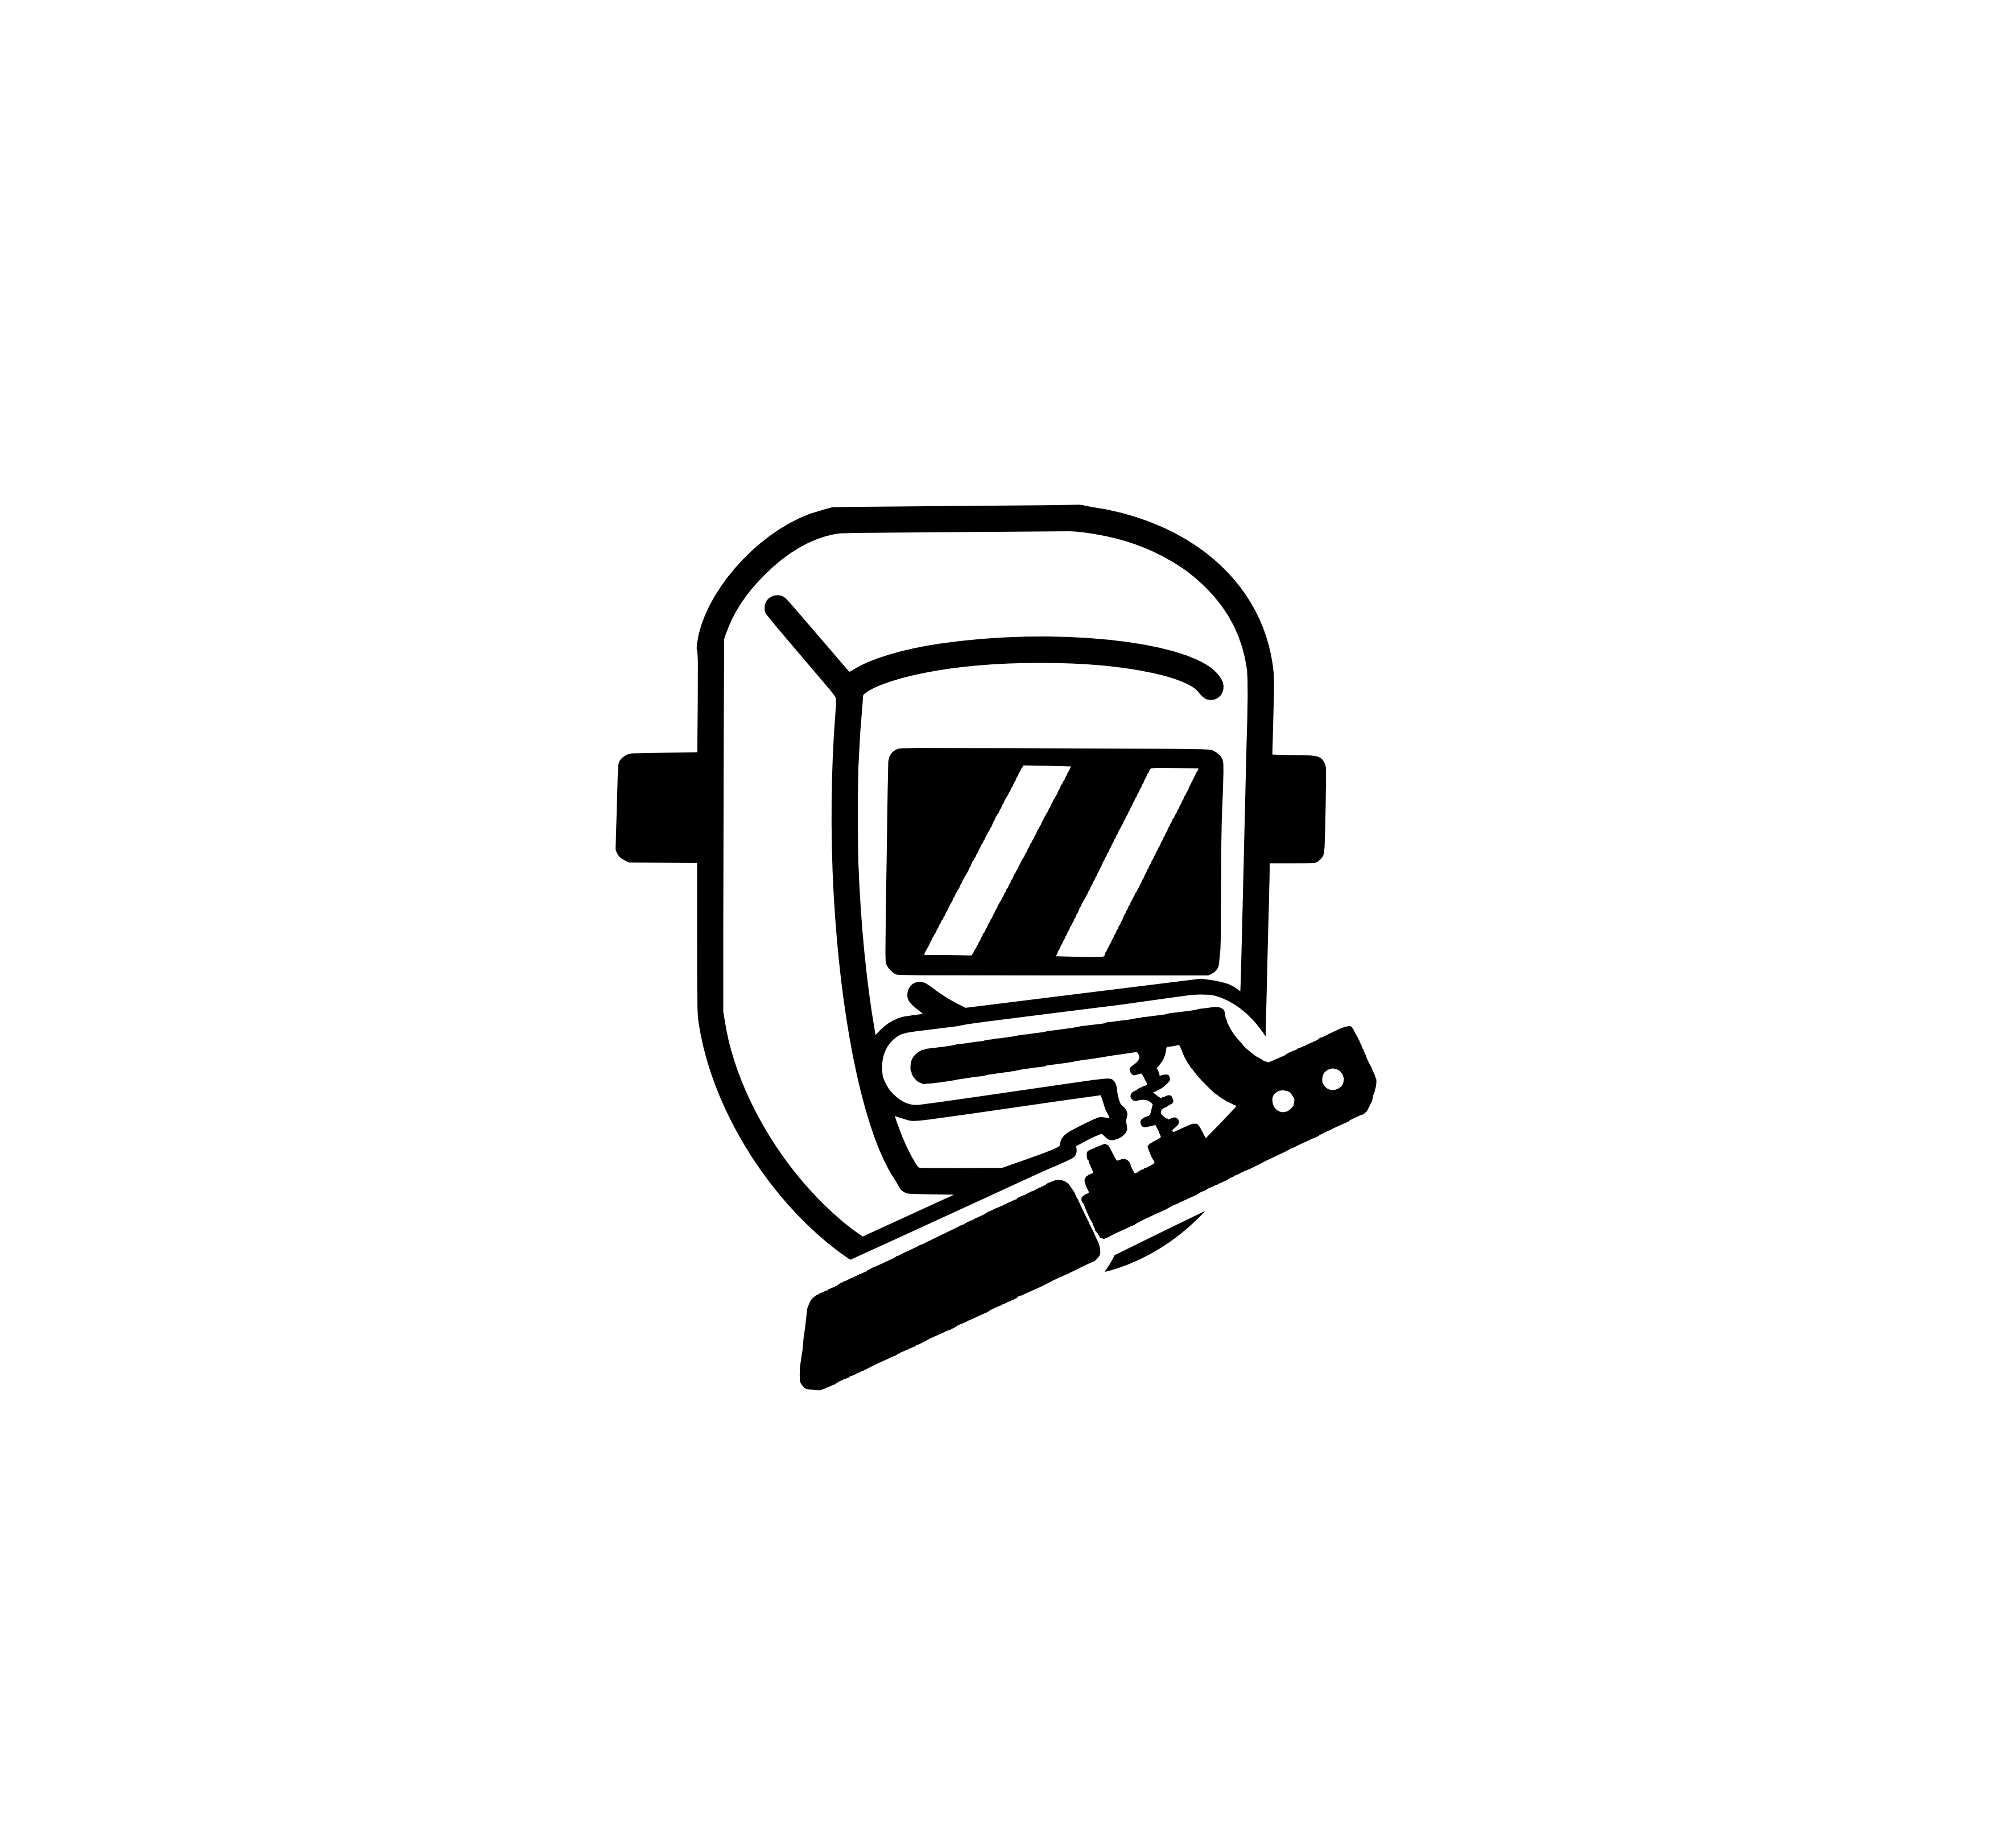 A stylized image of a welding helmet with the text: Elevated Welding and Designs, LLC